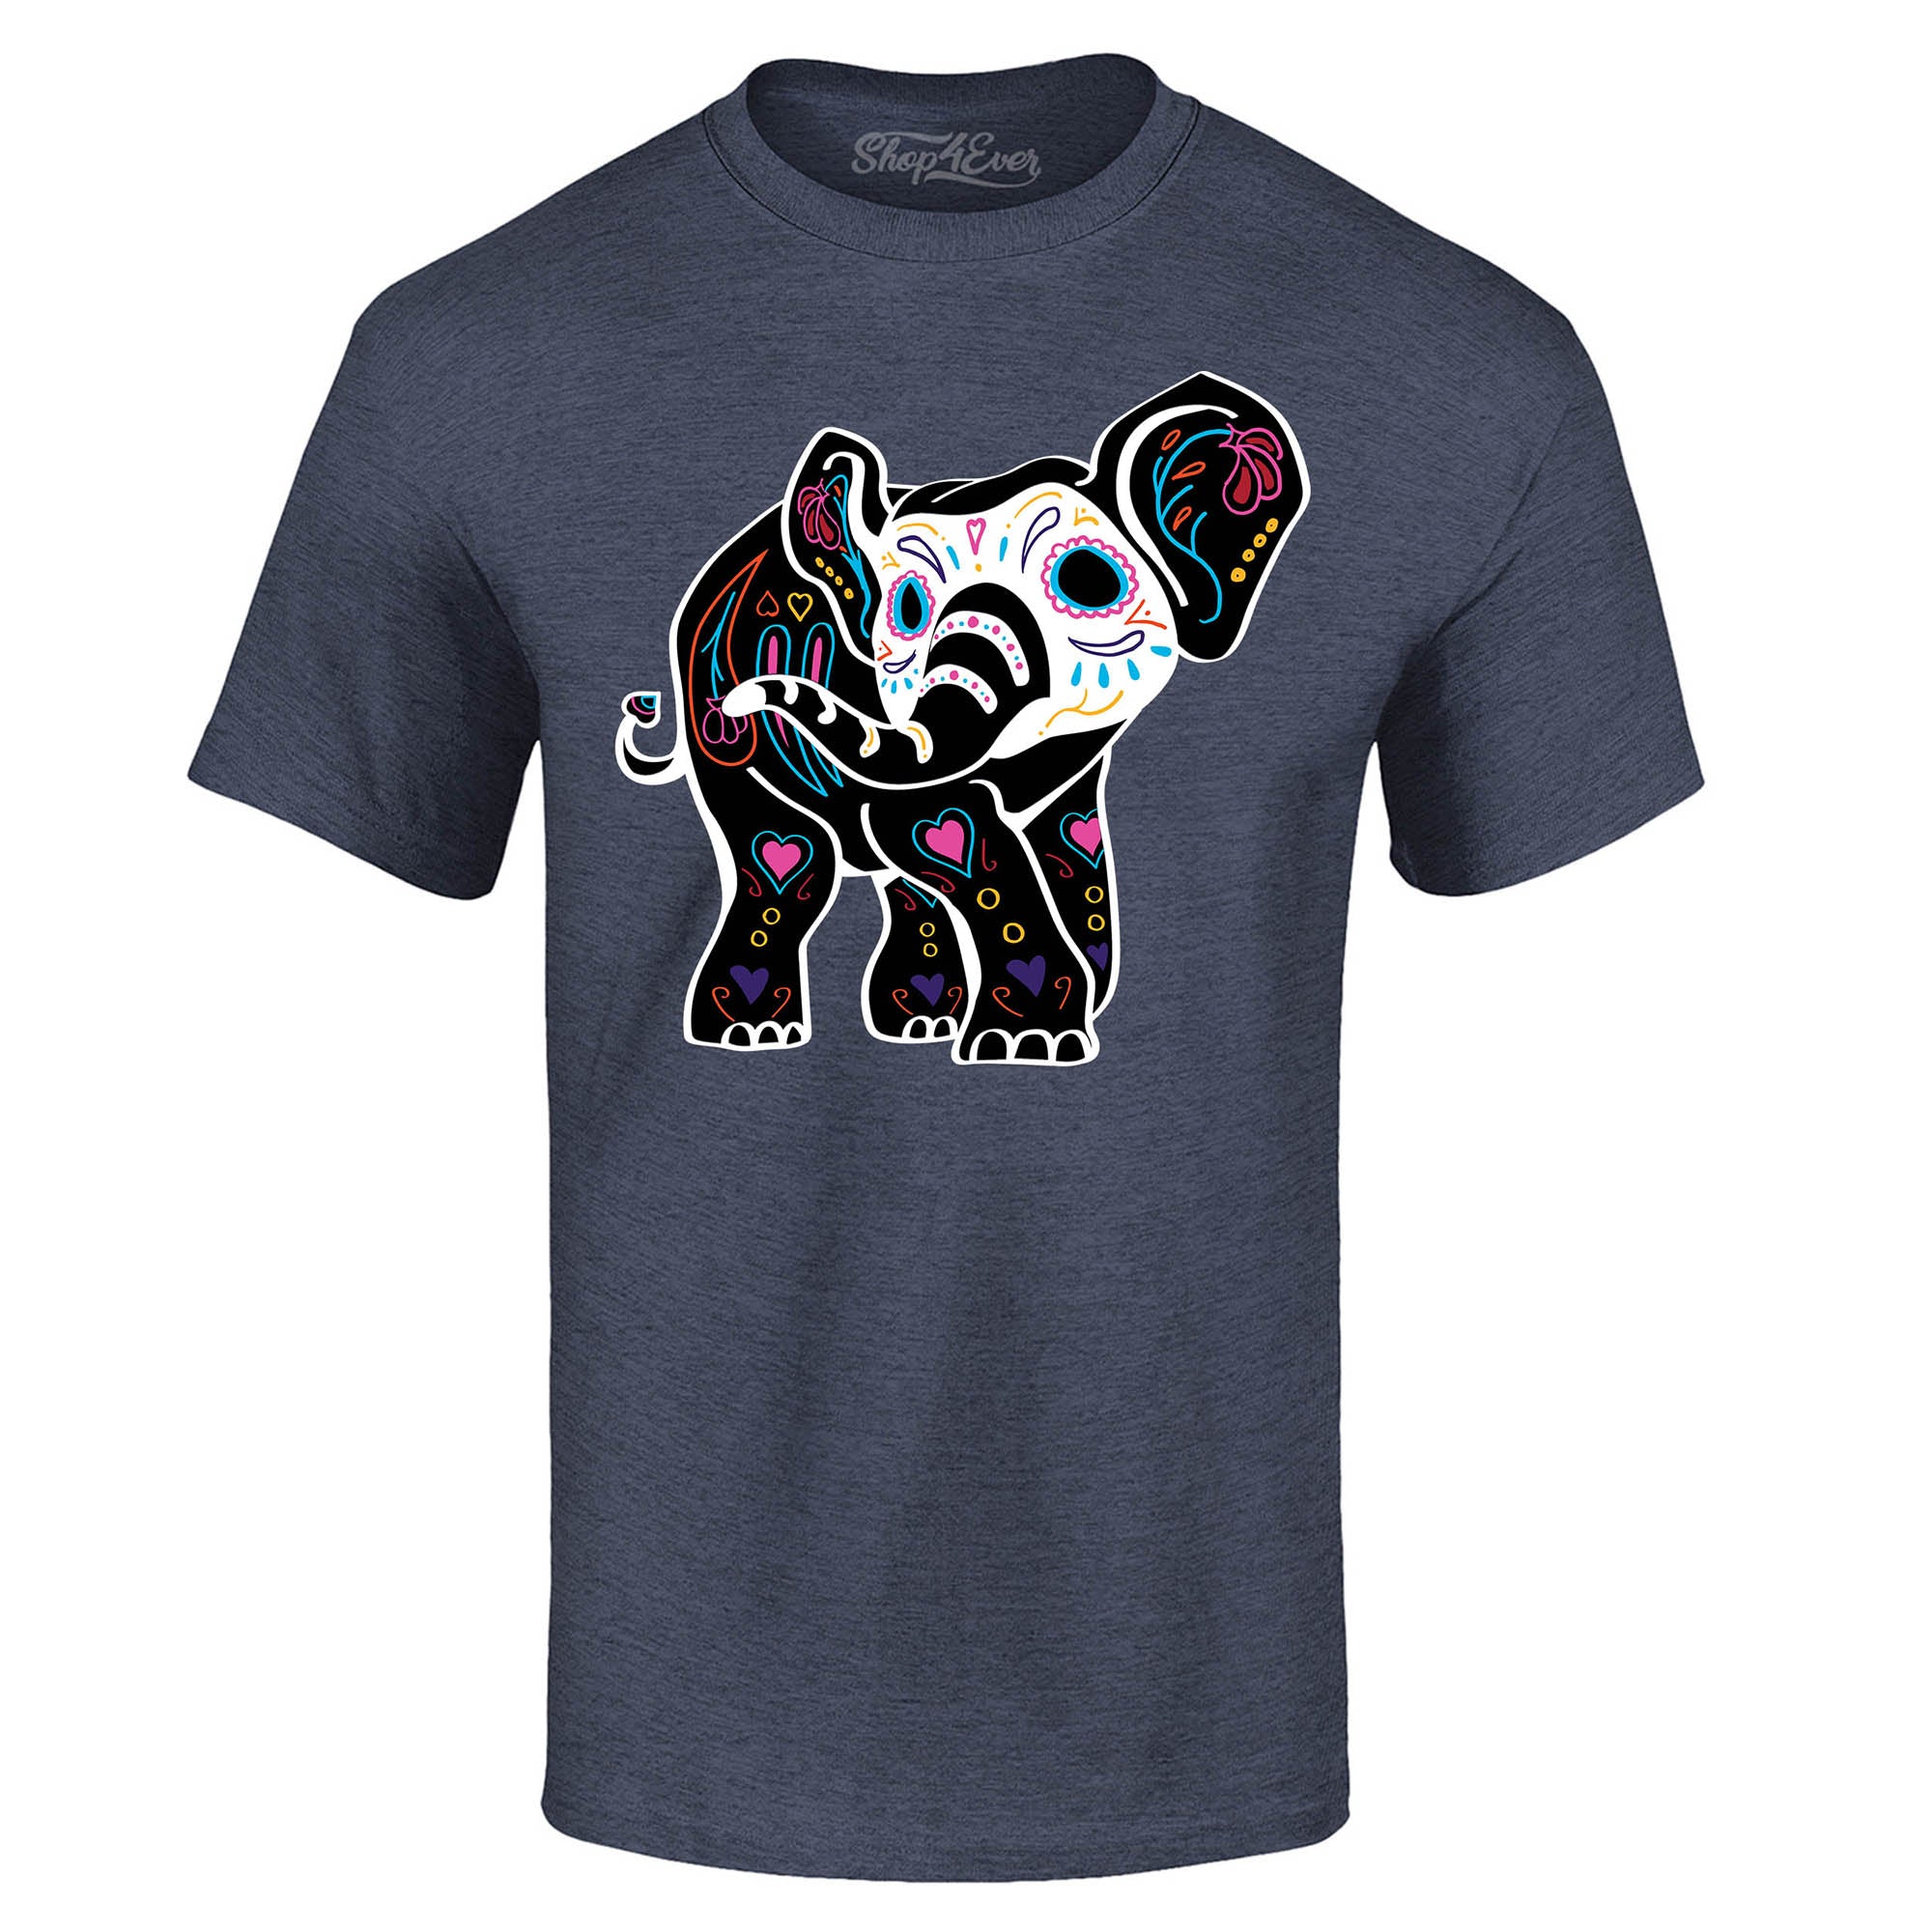 Day of The Dead Sugar Elephant T-Shirt